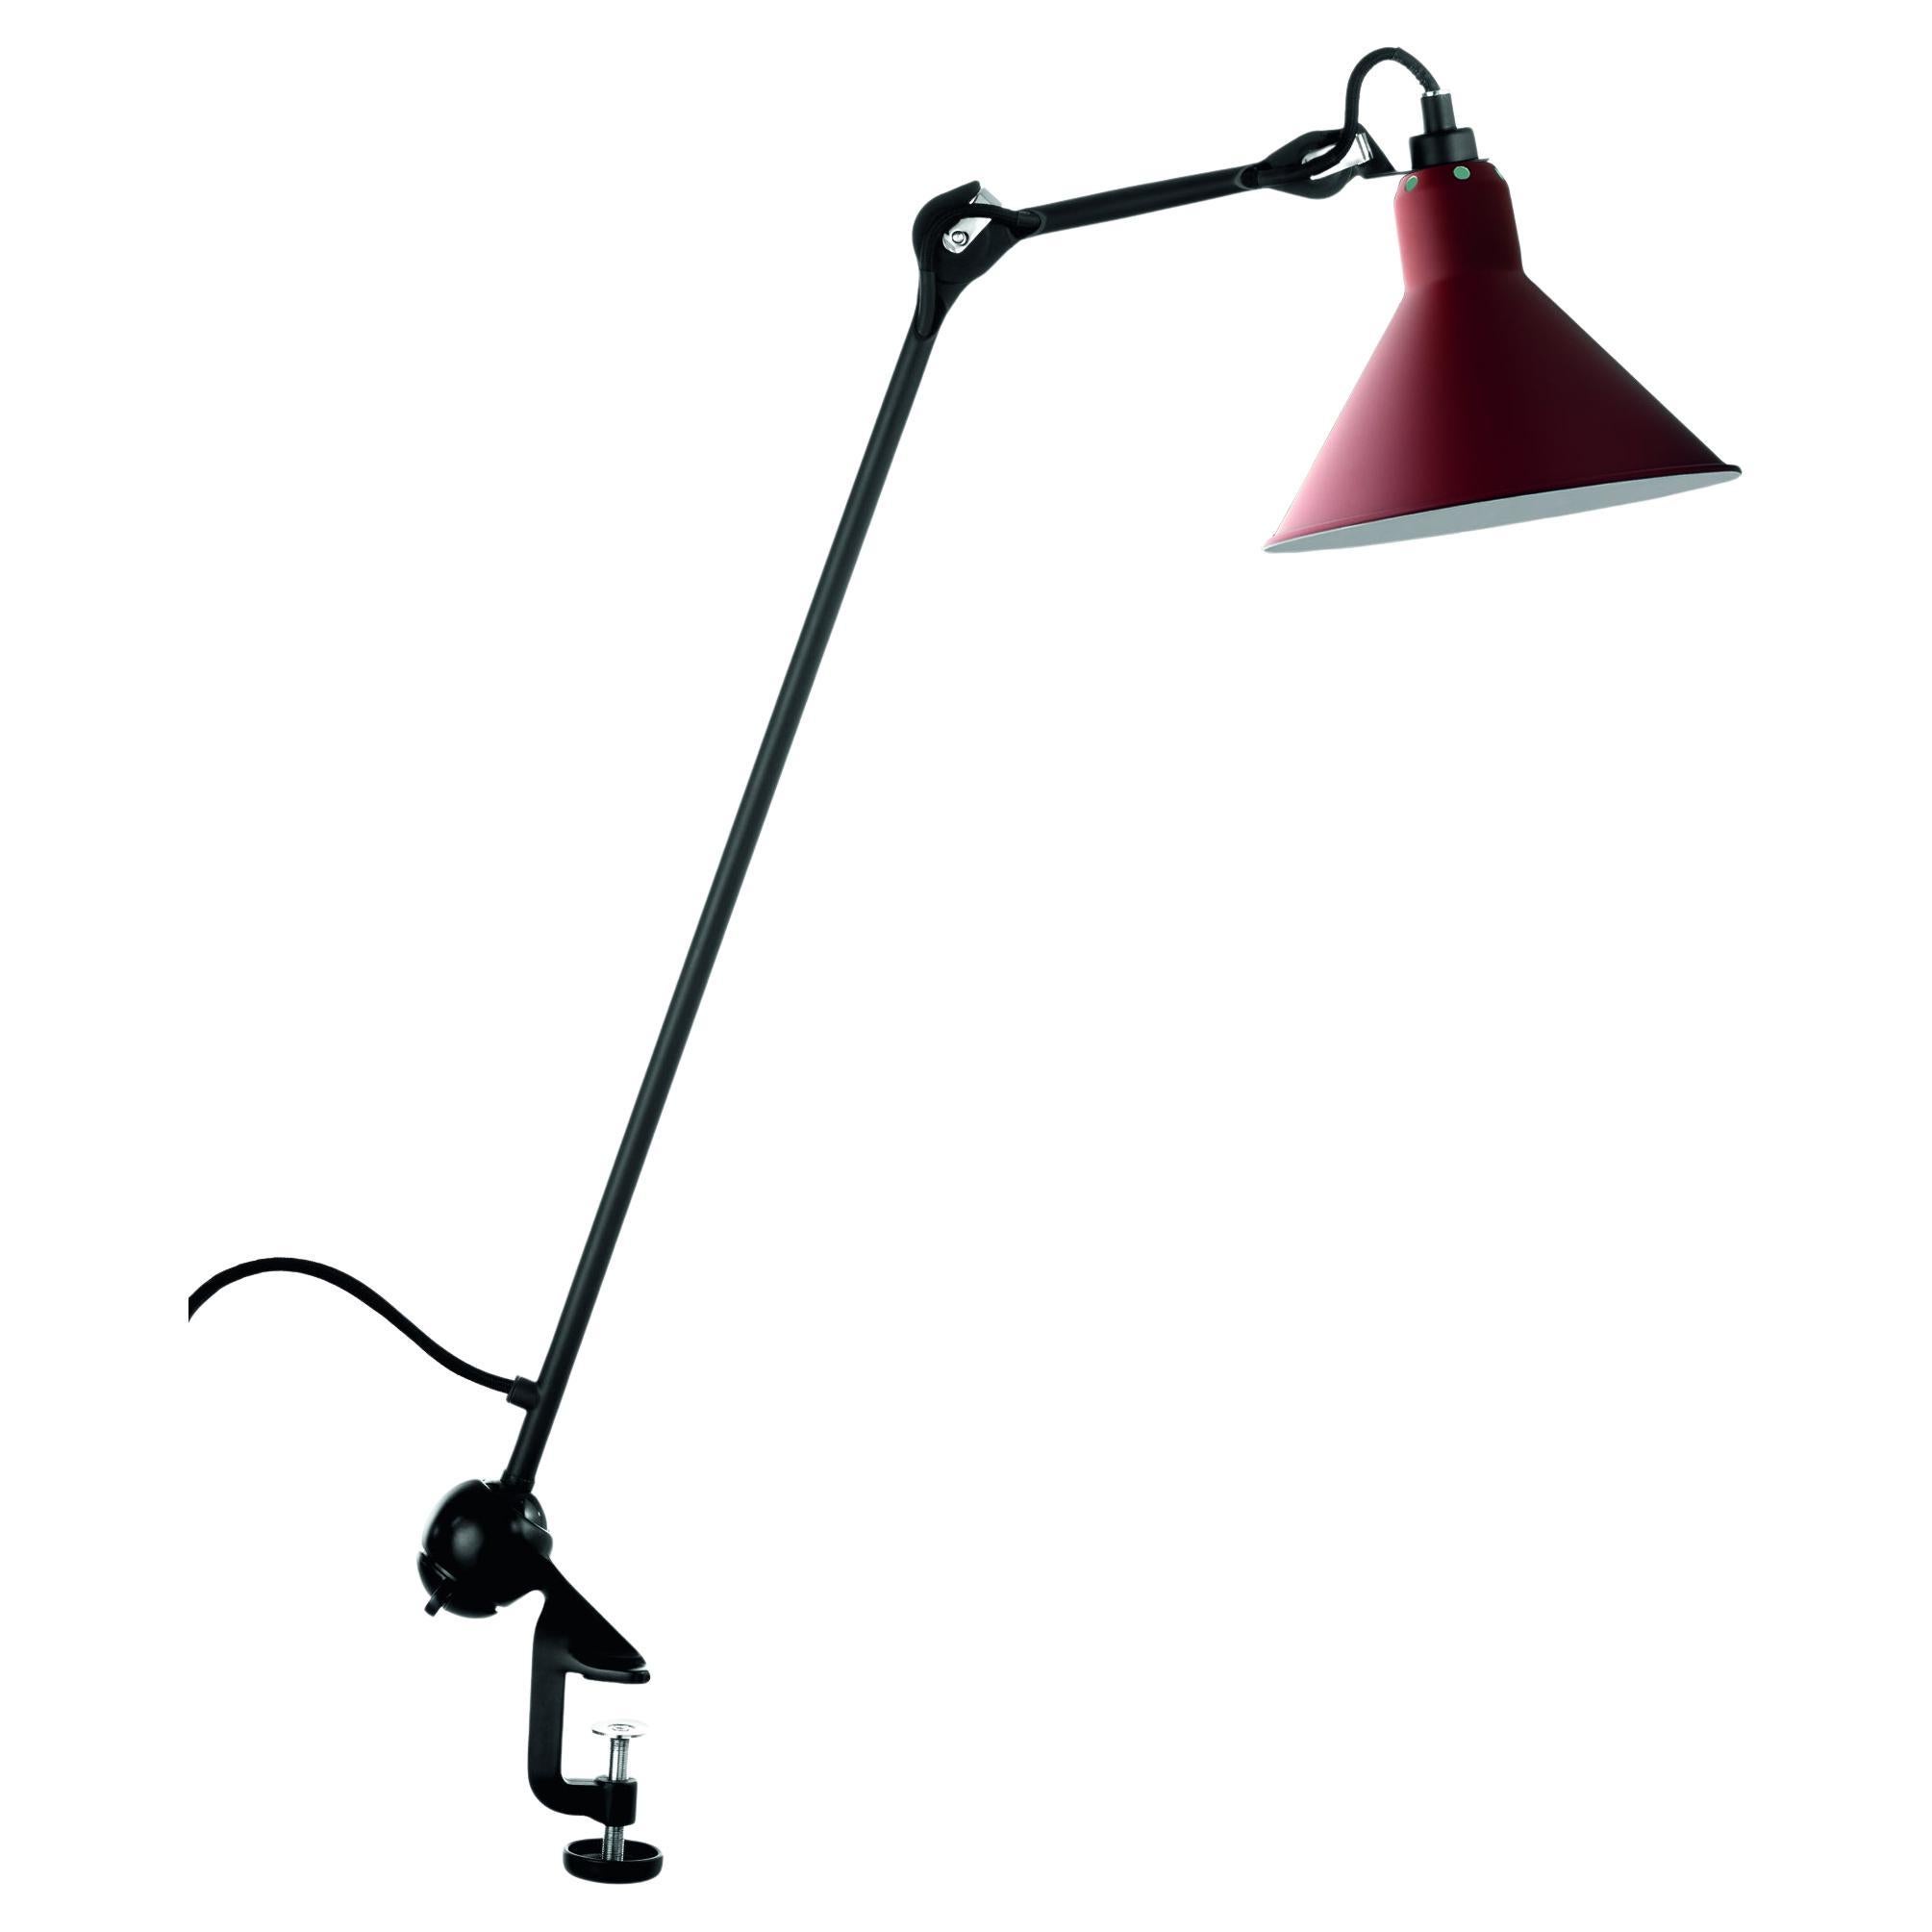 DCW Editions La Lampe Gras N°201 Conic Table Lamp in Black Arm and Red Shade For Sale